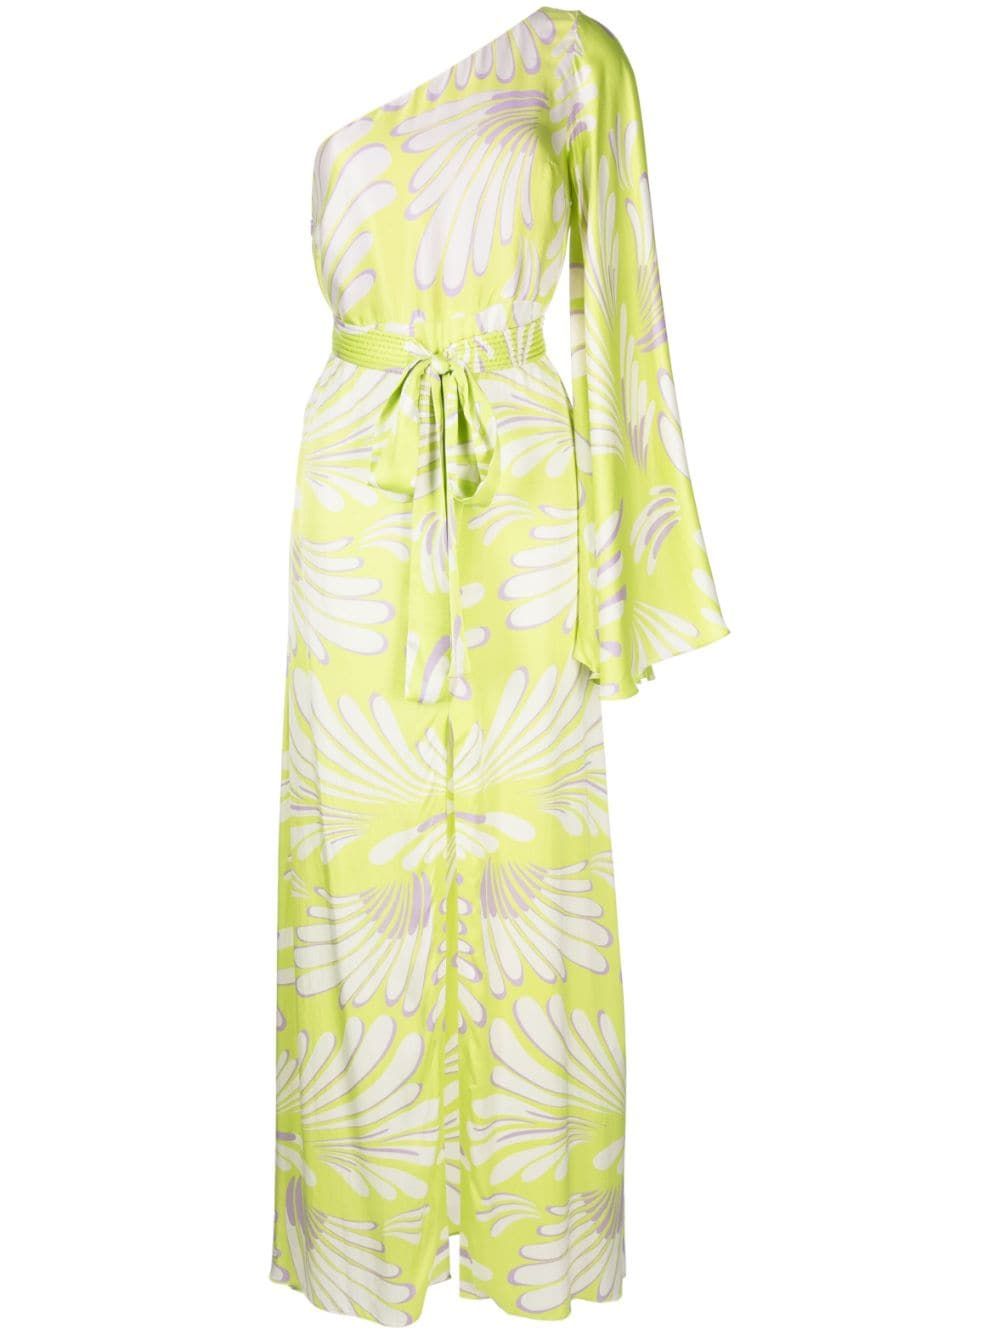 Alexisabstract-print long dress$616-30%$426Import duties included | Farfetch Global